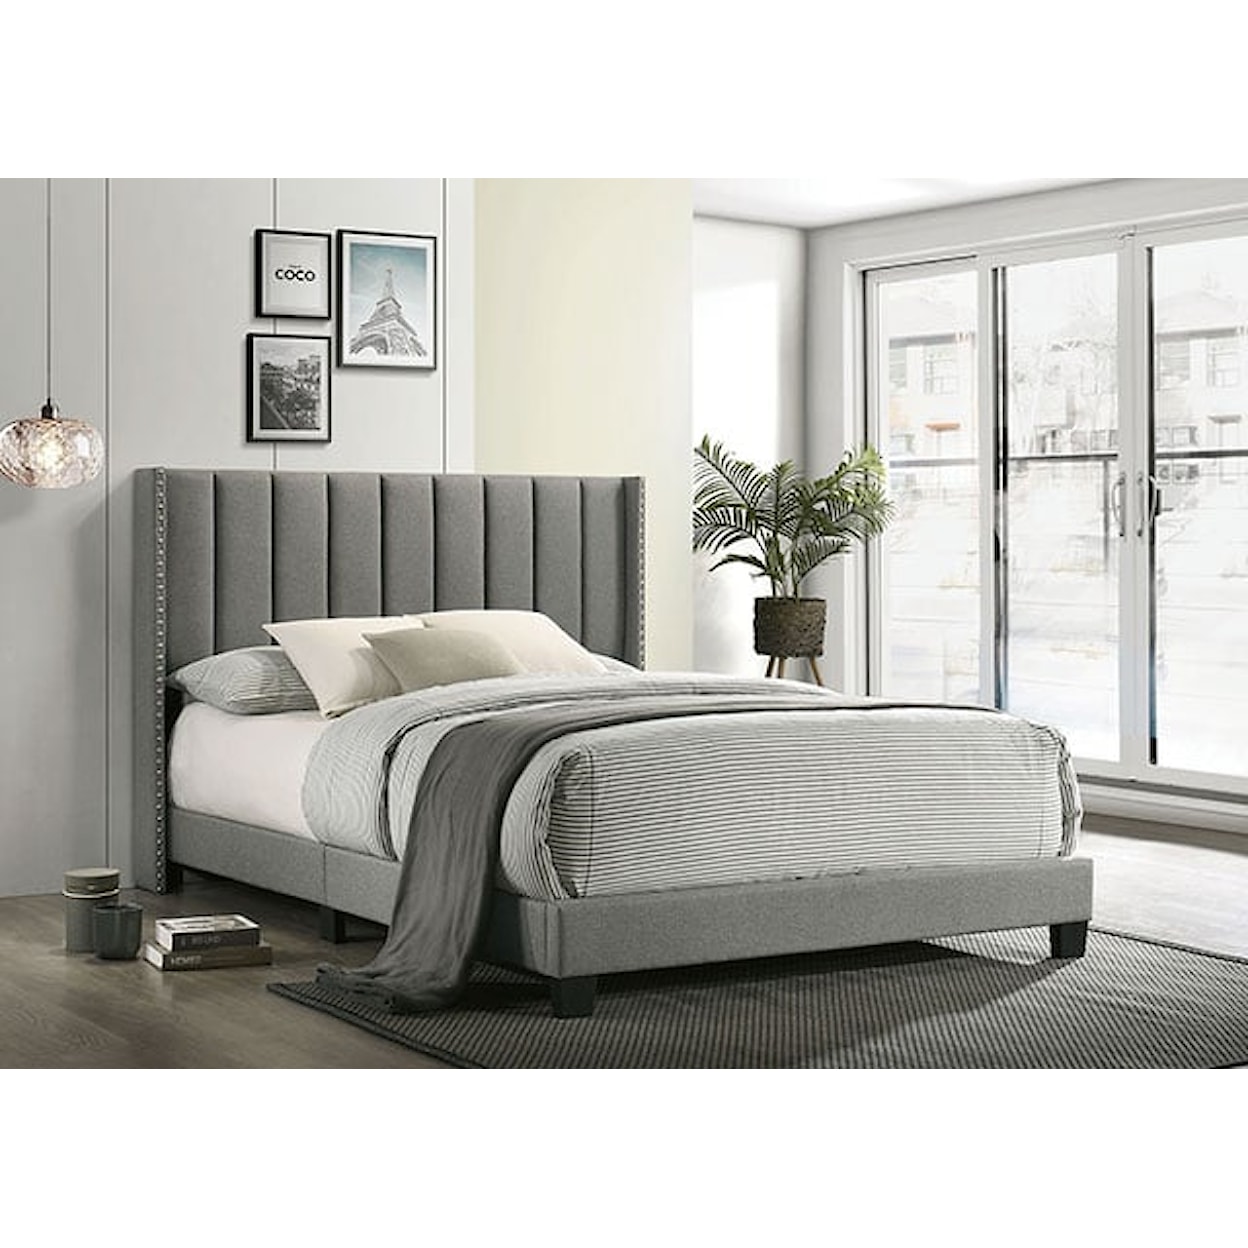 Furniture of America Kailey Upholstered Queen Bed